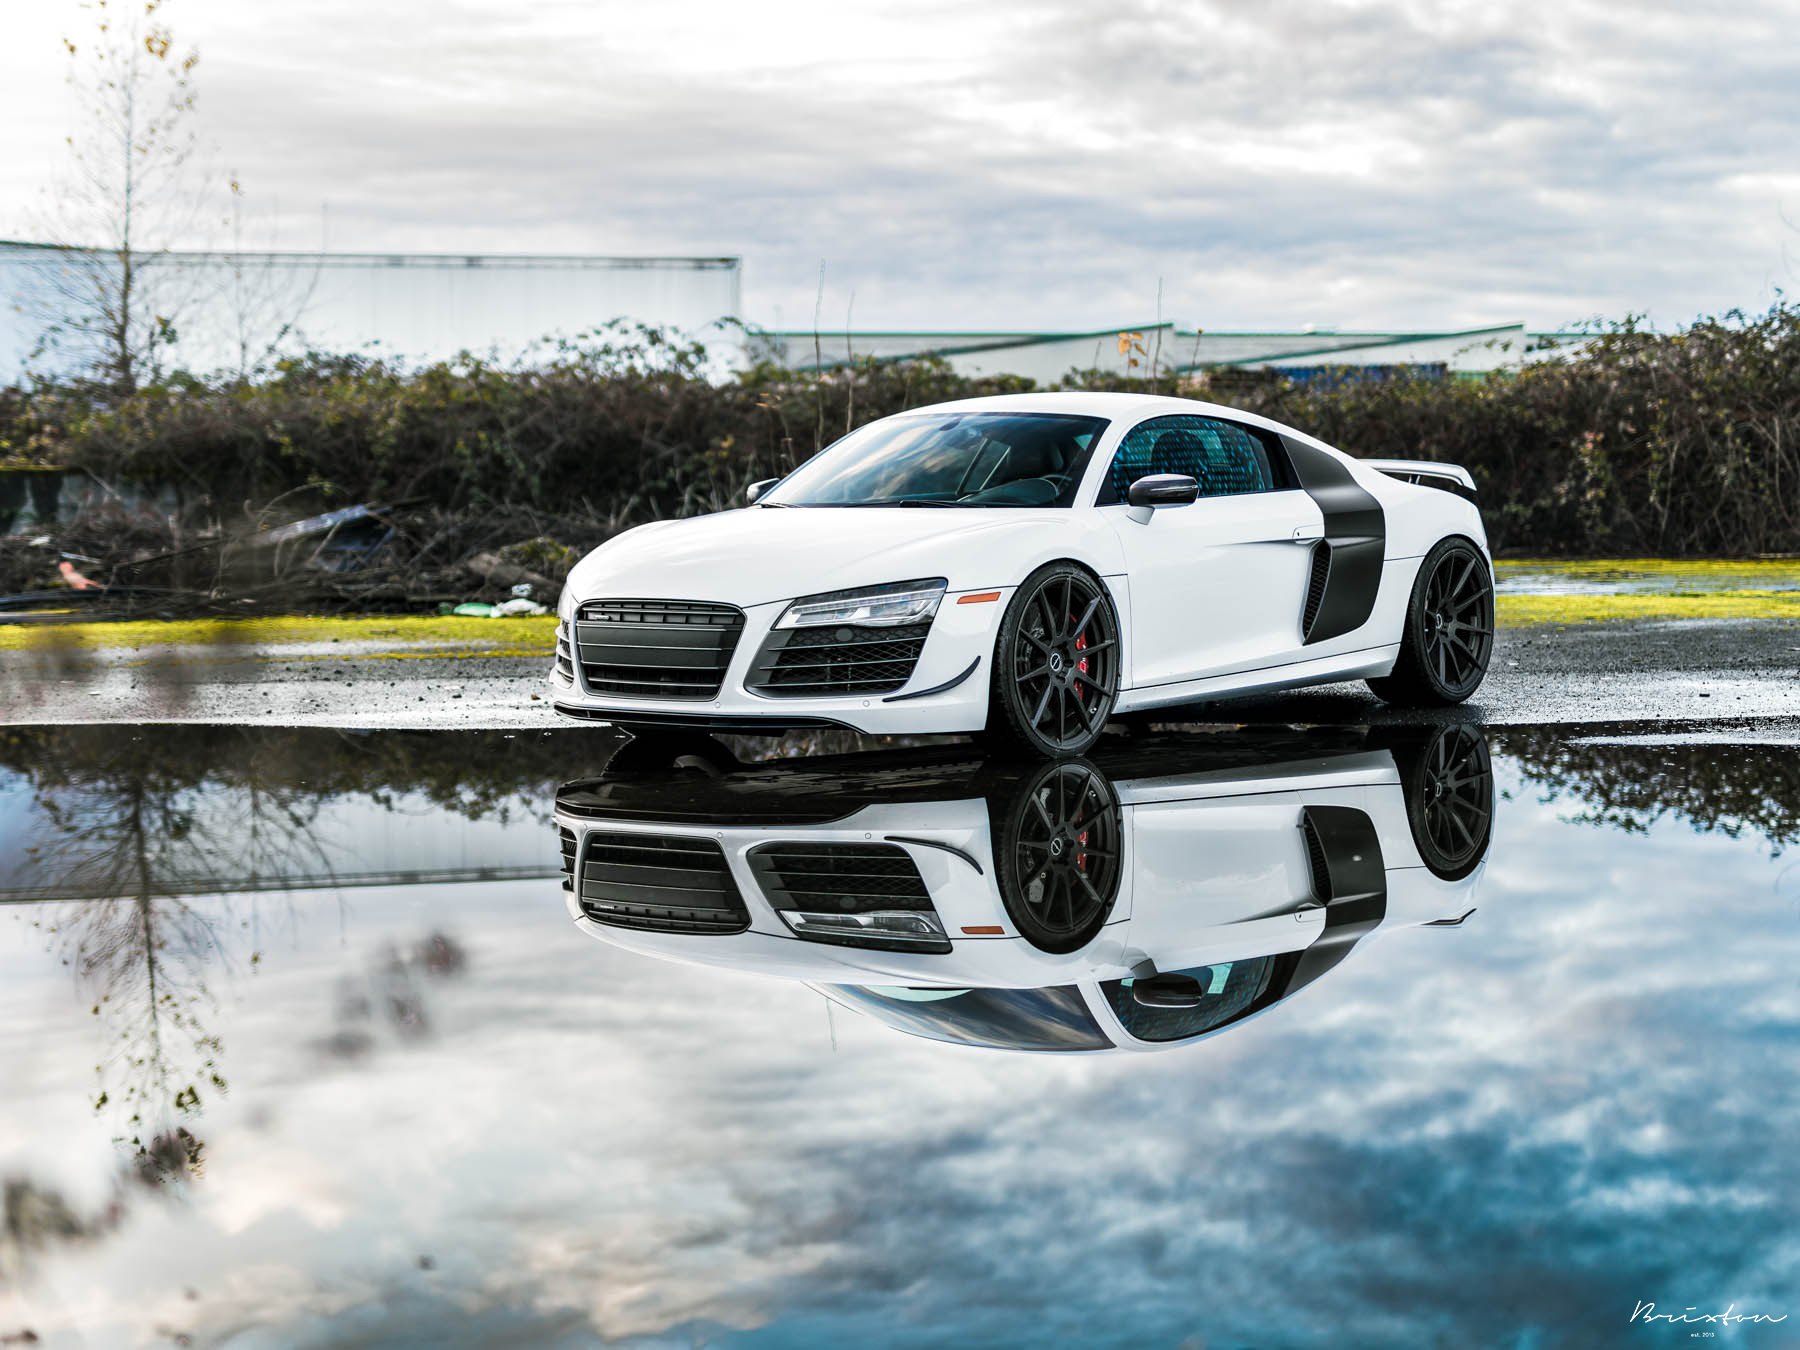 Aftermarket LED Headlights on White Audi R8 - Photo by Brixton Forged Wheels